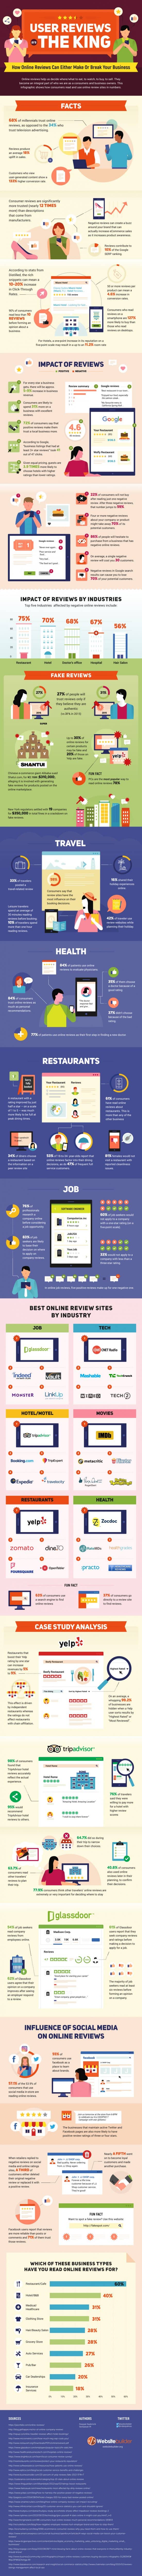 Infographic about how user reviews can either make or break a business.